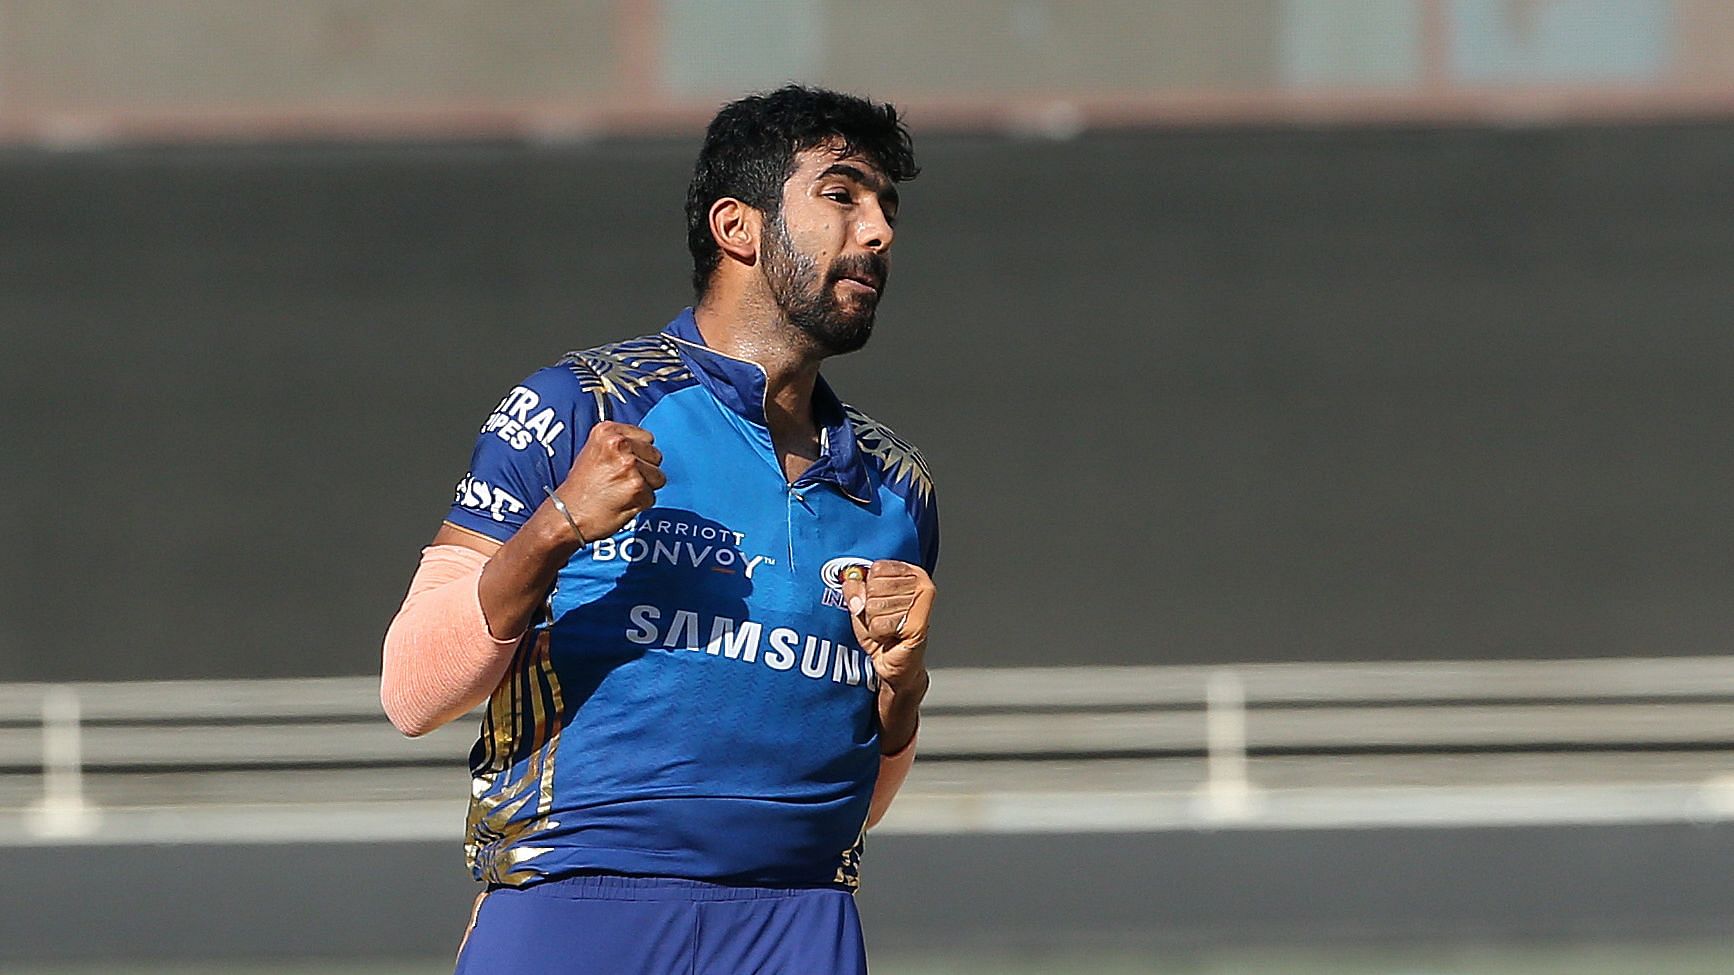 Jasprit Bumrah took three wickets for 17 runs in his four overs against Delhi Capitals to take his wickets tally to 23.